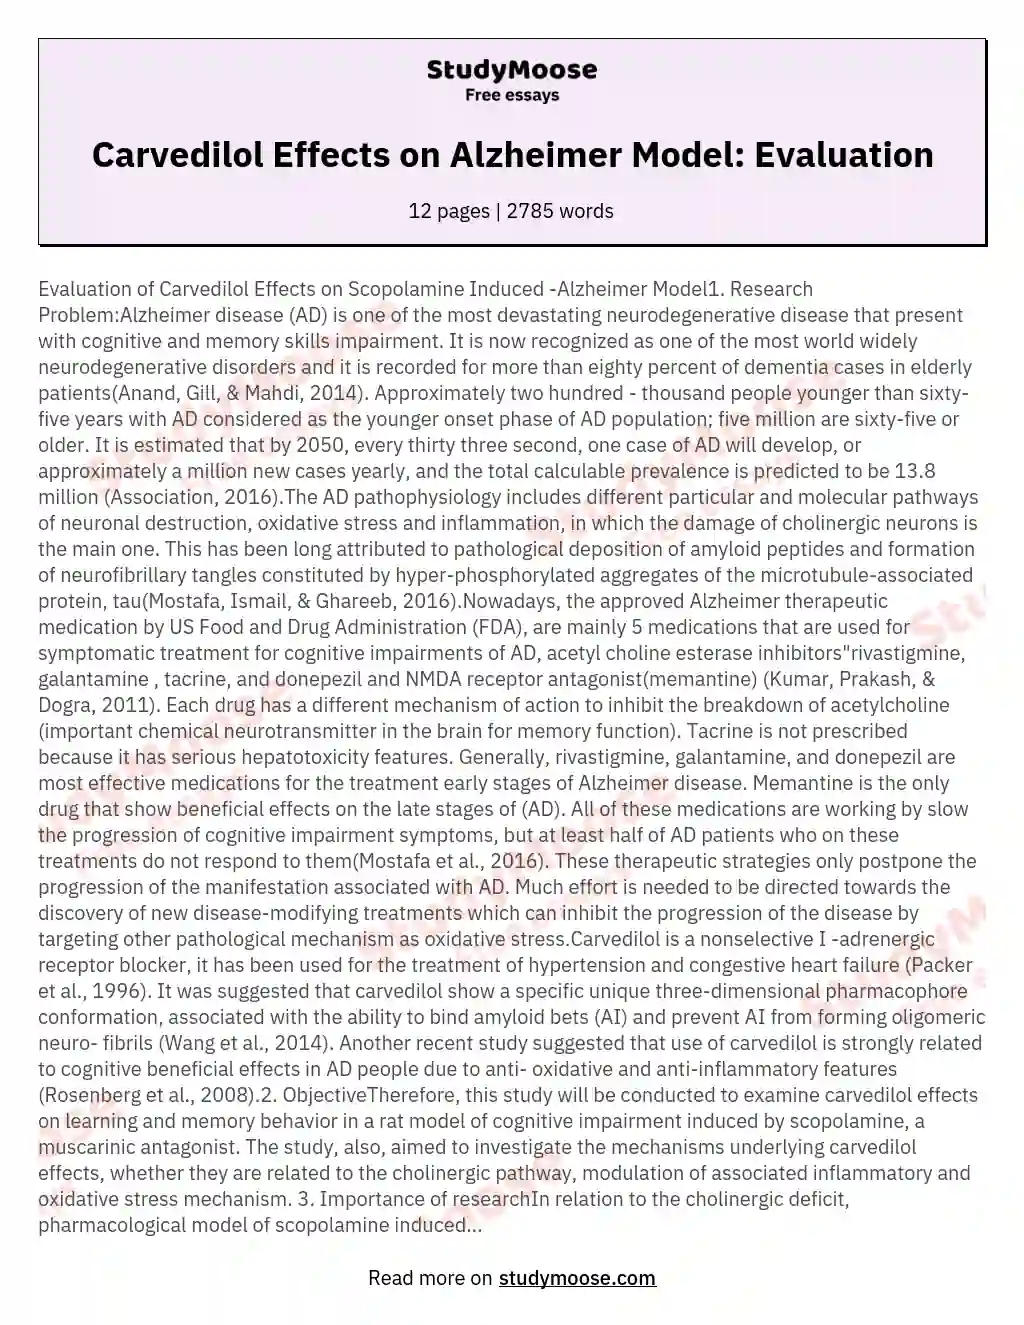 Evaluation of Carvedilol Effects on Scopolamine Induced Alzheimer Model1 Research ProblemAlzheimer disease